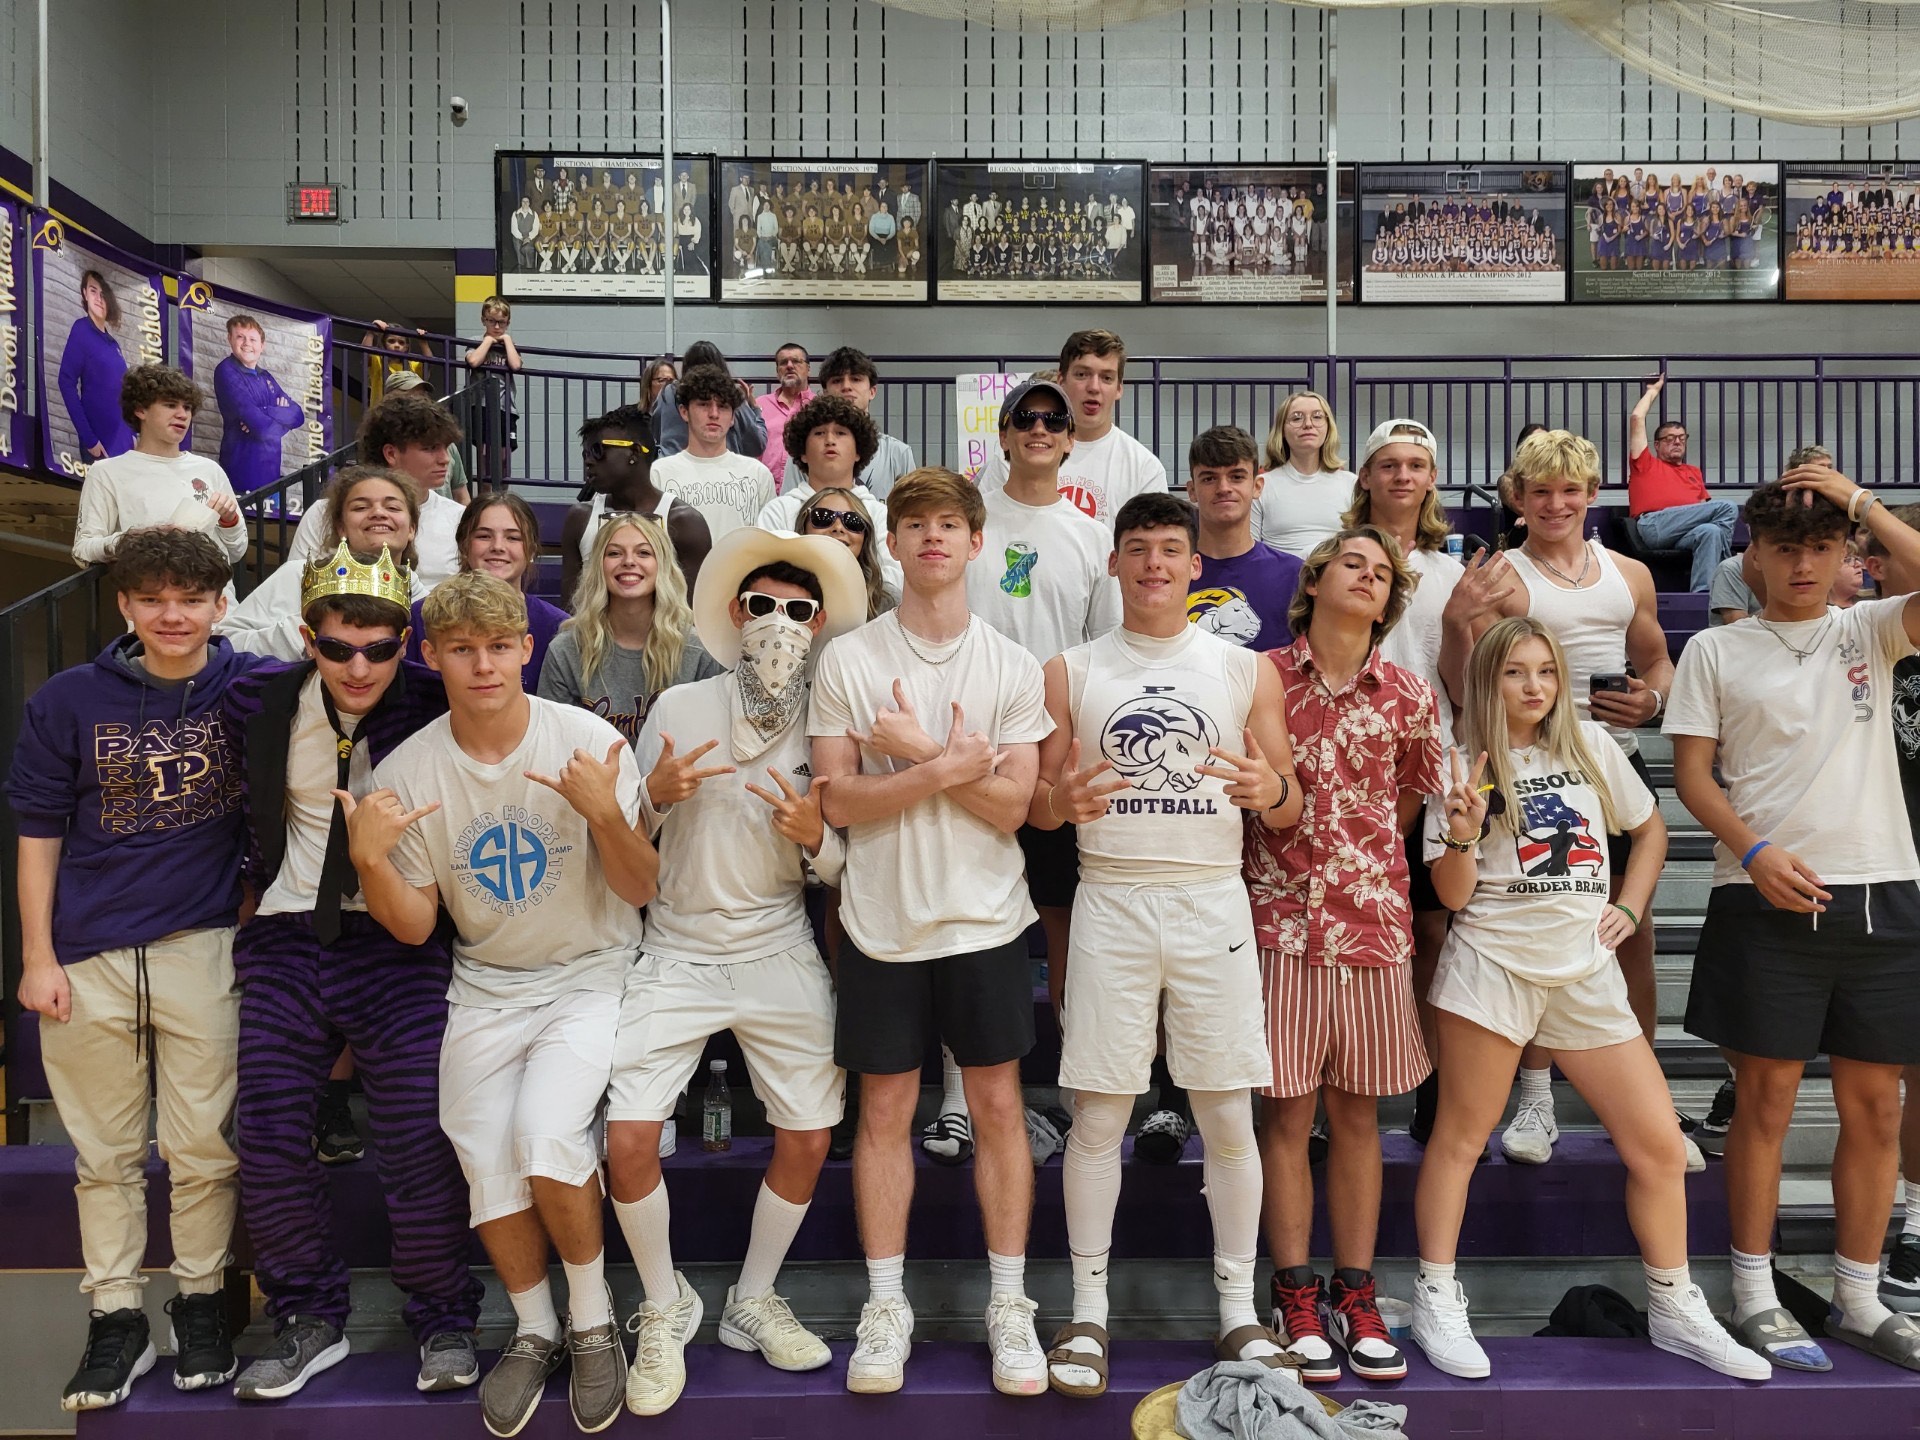 Our White Out cheer block poses for a picture.